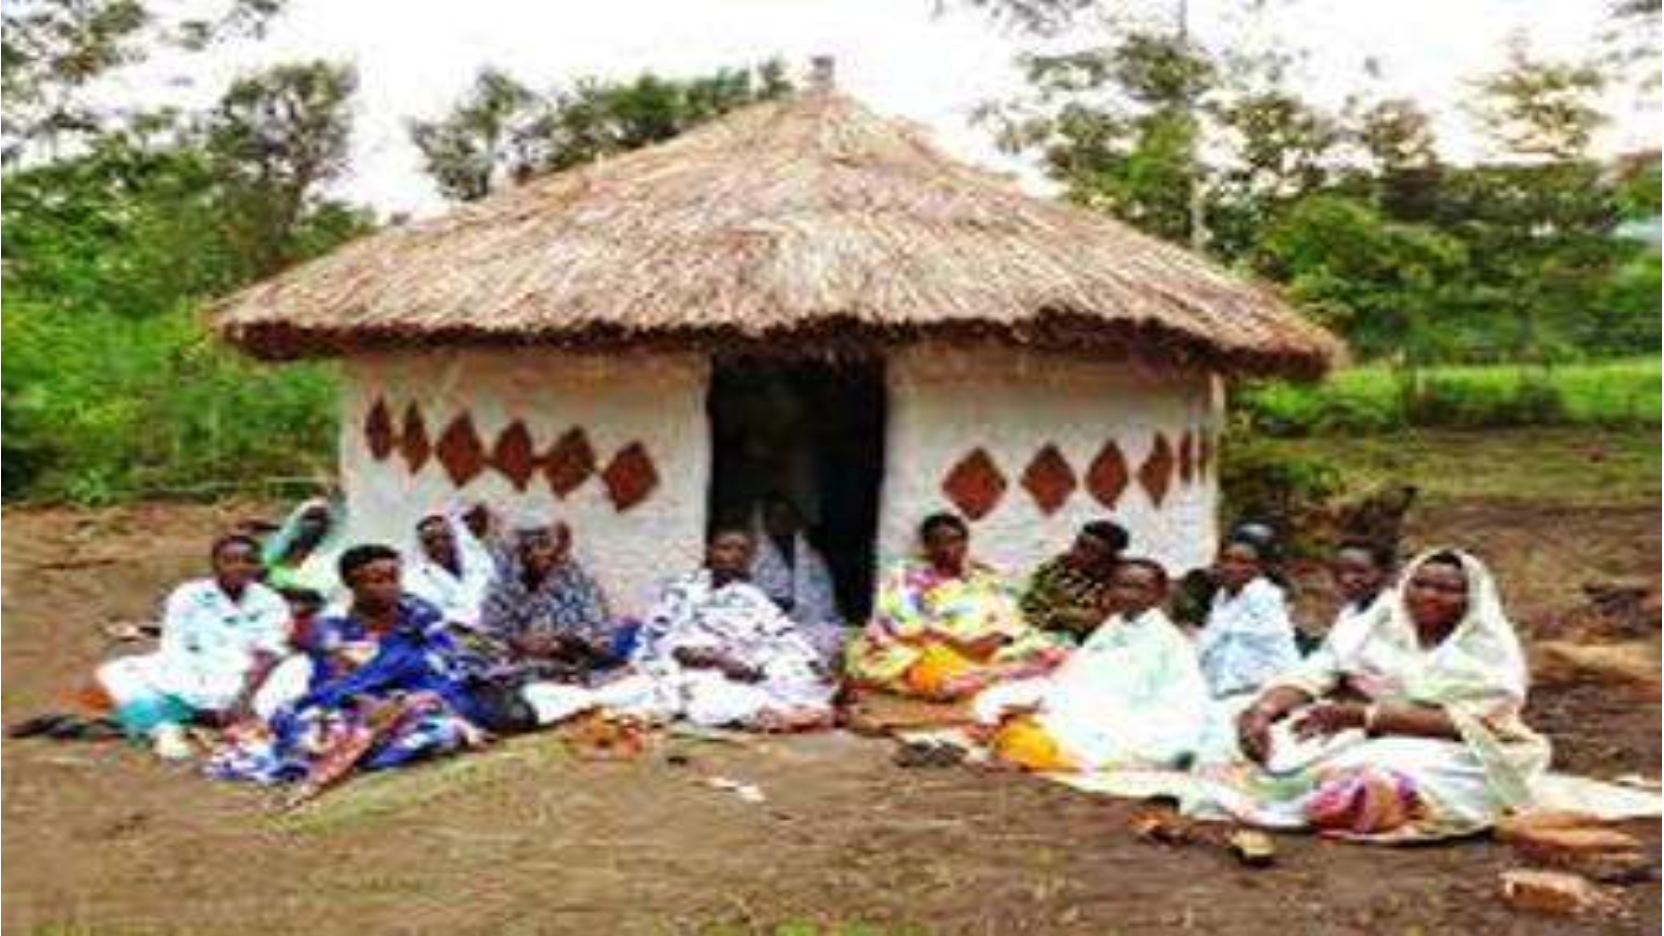 A Typical Traditional house of Banyankole